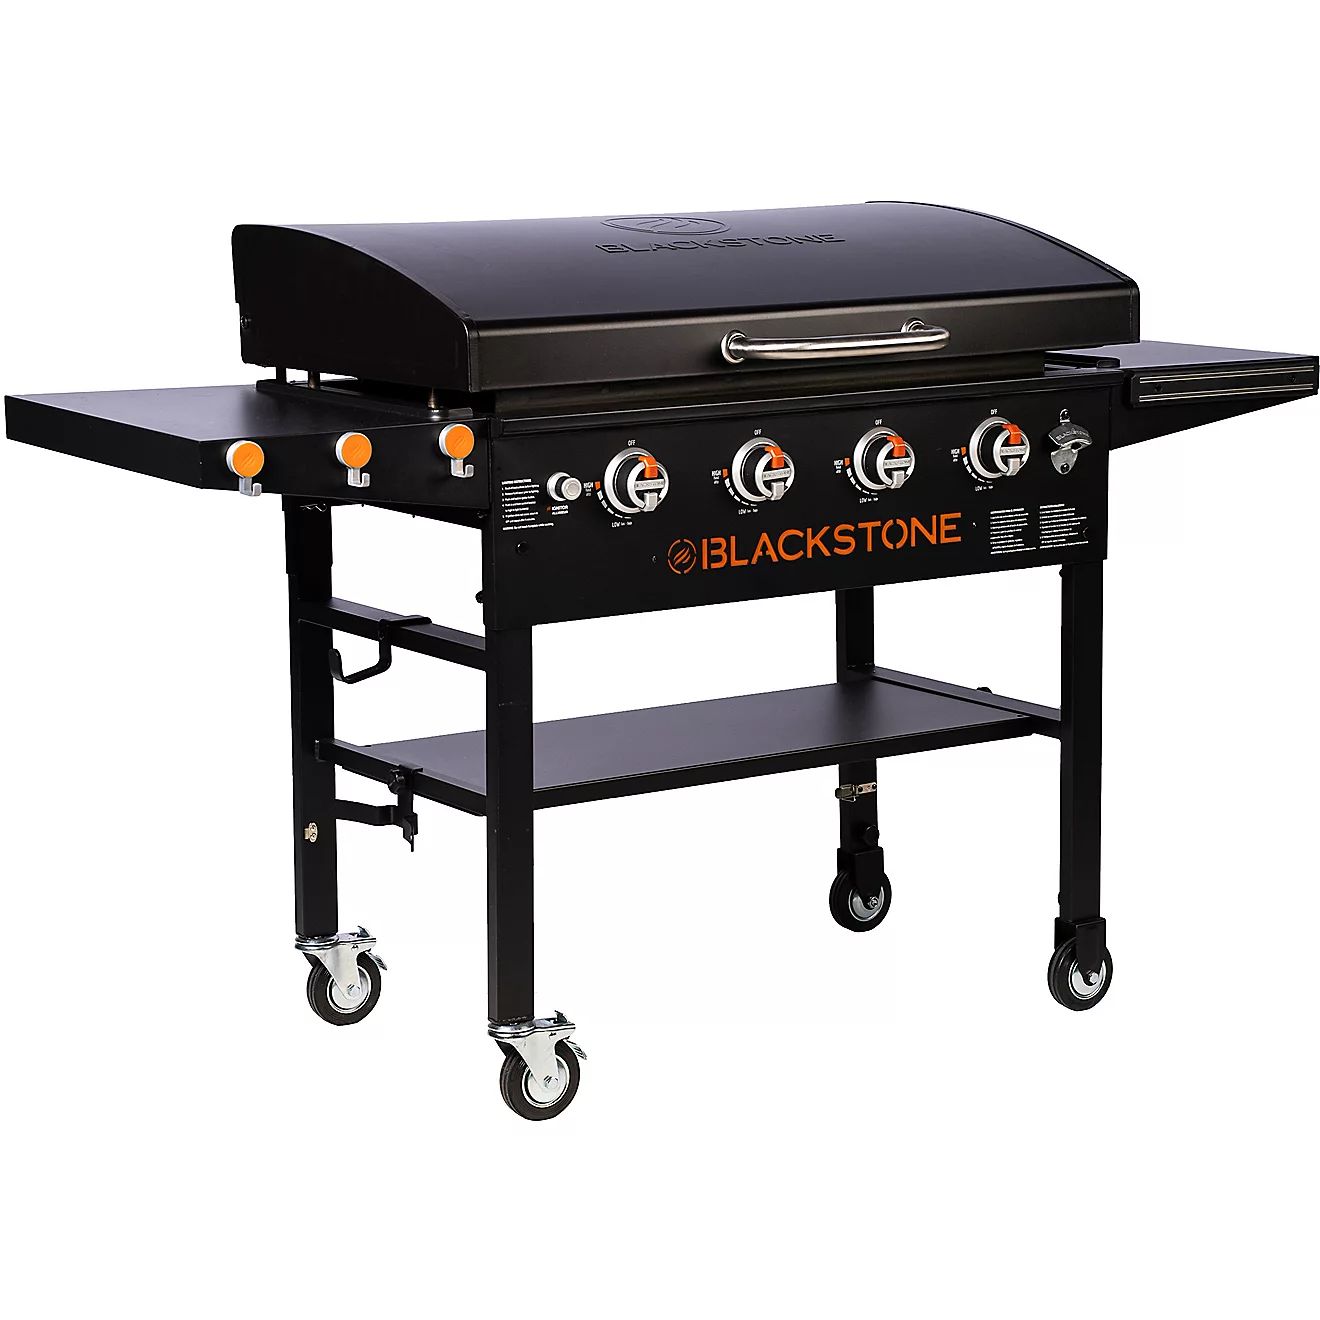 Blackstone 36 in 4-Burner Griddle Station with Hood | Academy Sports + Outdoors